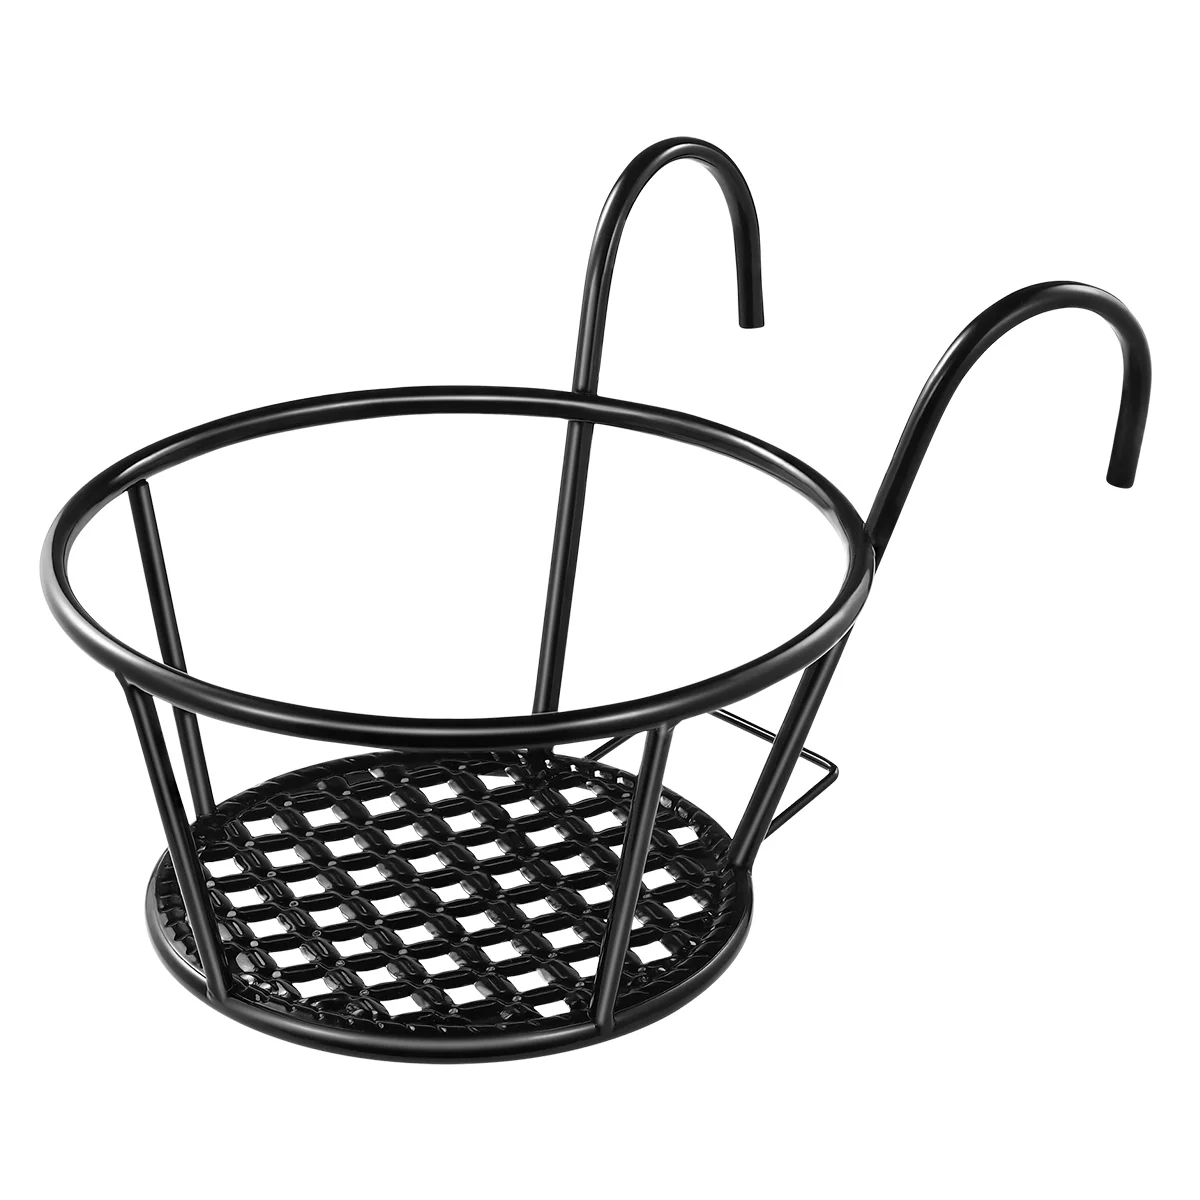 

Hanging Vase Planters Flower Pot Holder Metal Potted Stand Mounted Round Baskets for Indoor& Outdoor Use- 1PCSHanging Flower